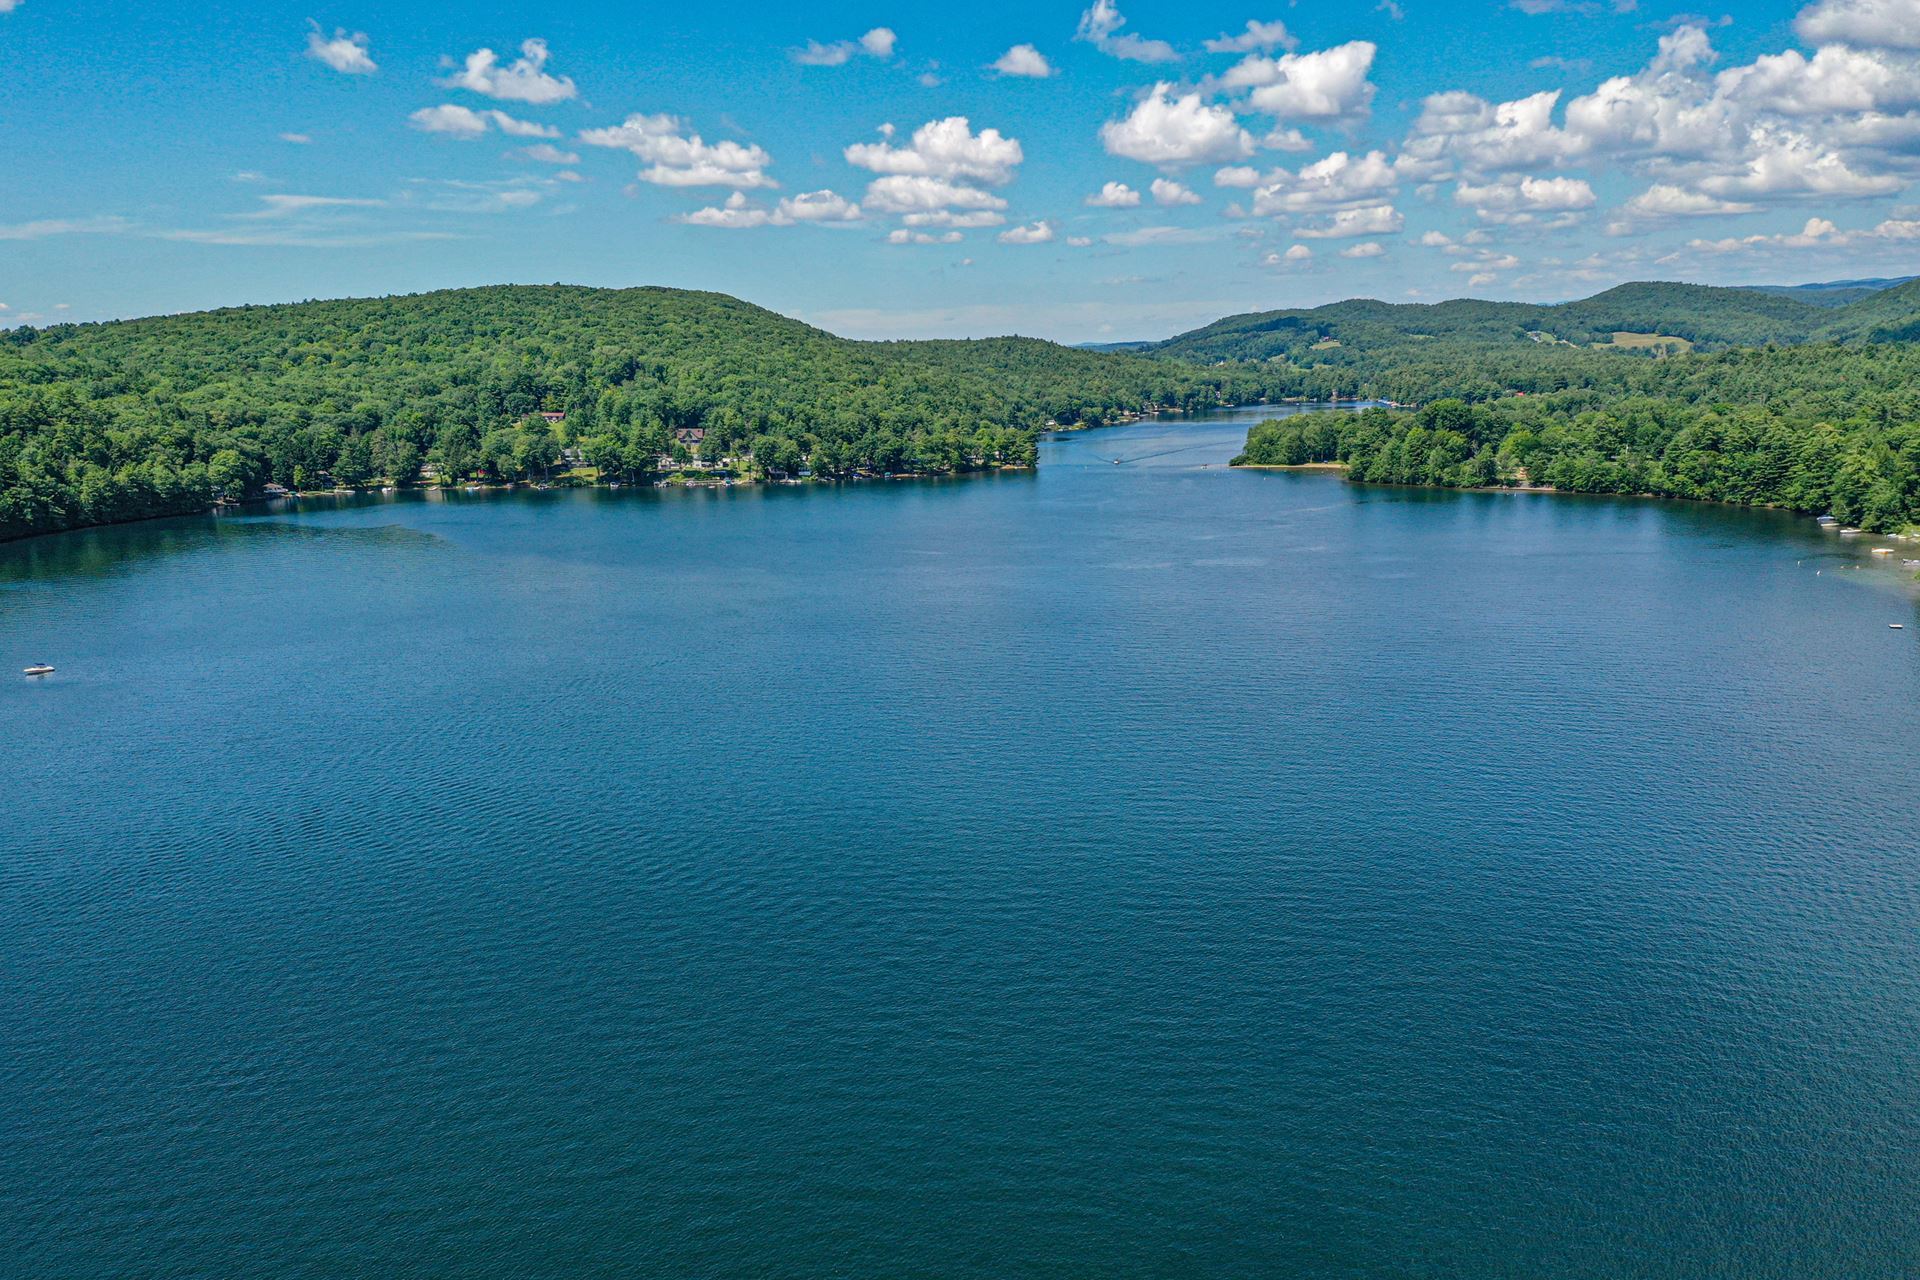 Arial view of Lake St. Catherine, looking north towards Poultney, VT.